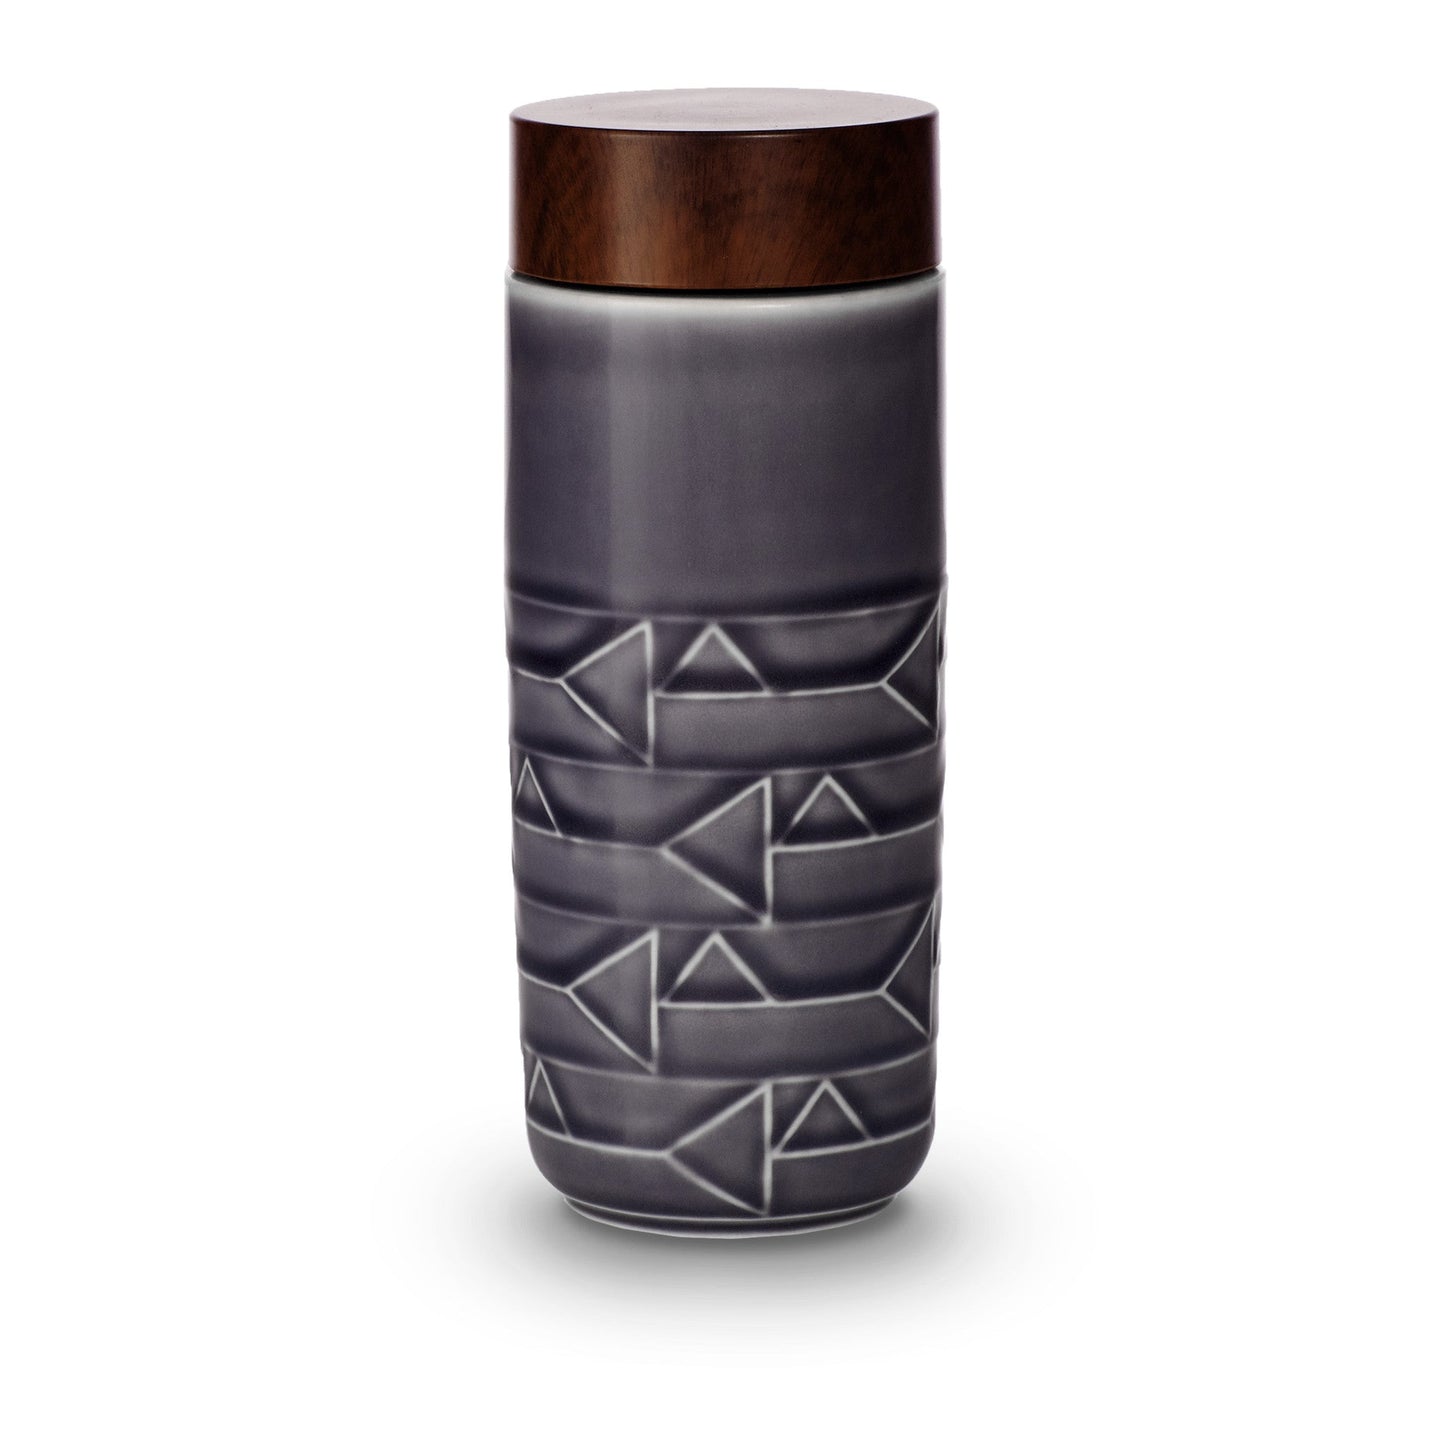 The Alchemical Signs Tumbler by ACERA LIVEN